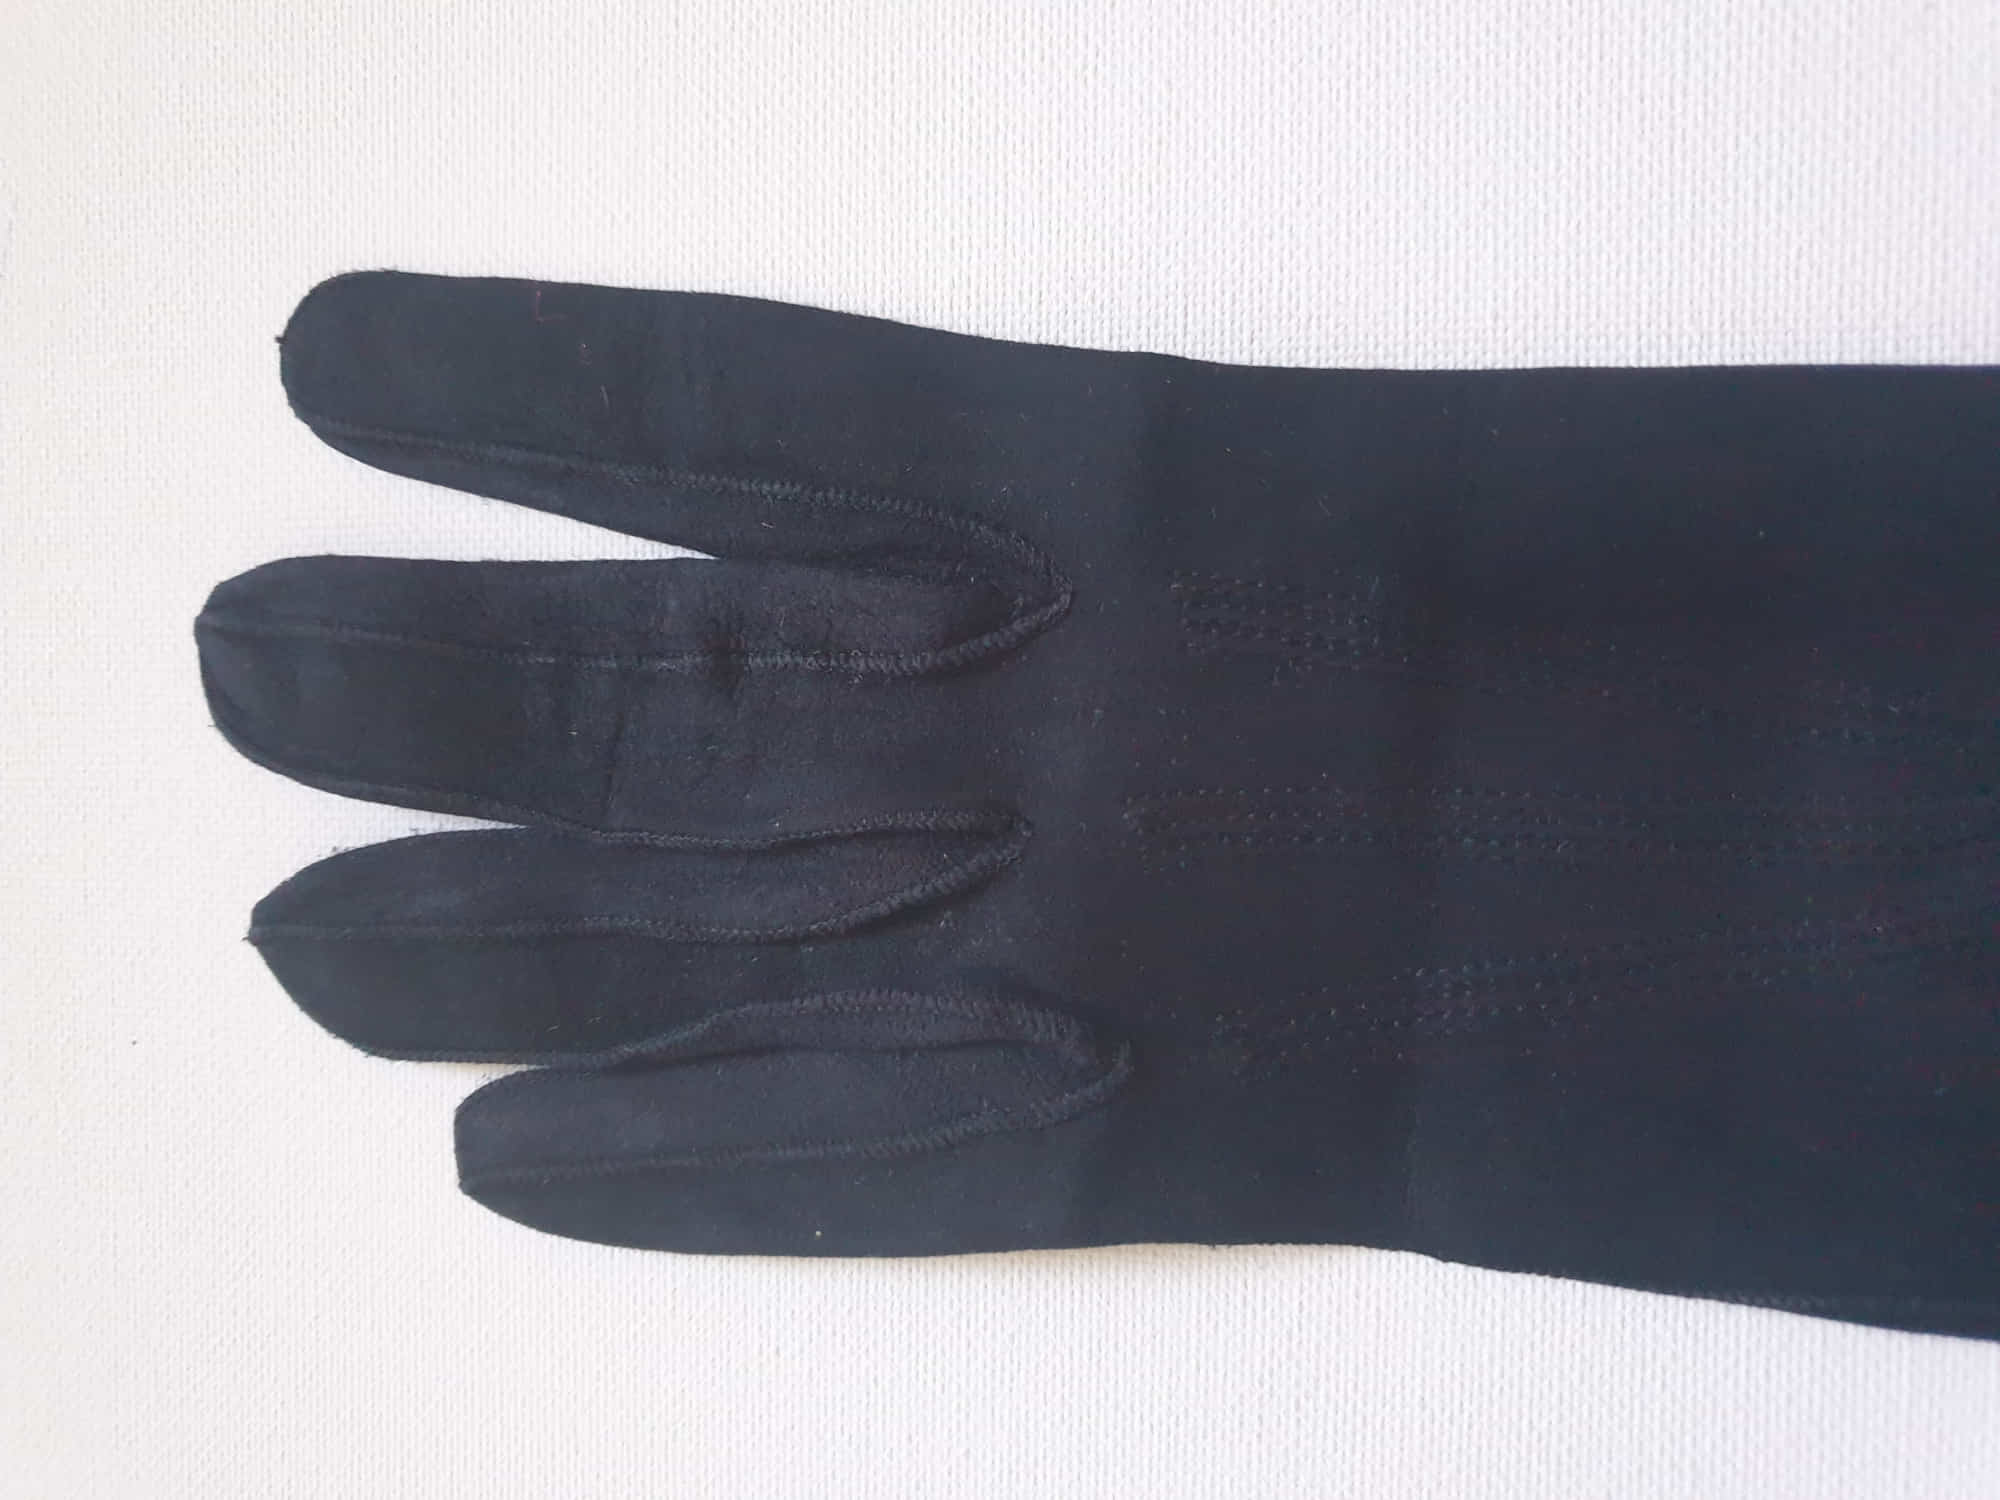 1950s vintage long black suede gloves with wrist opening size 6 1/2